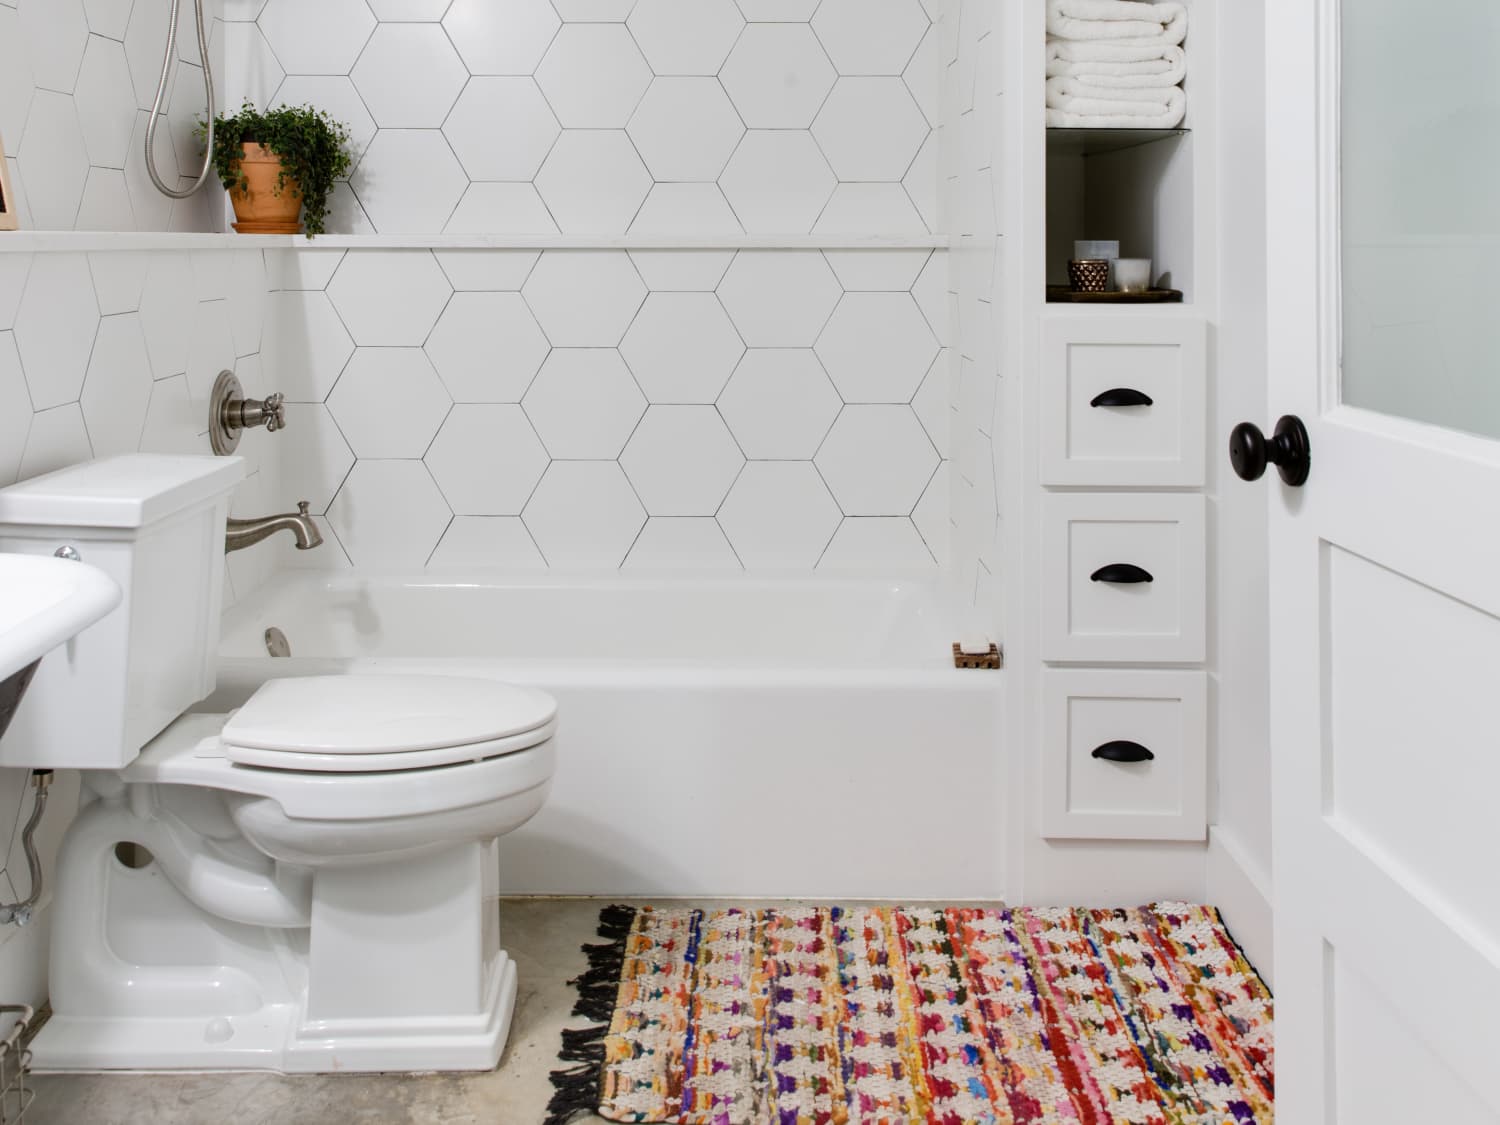 How to Use Adhesive Strips to Organize Your Bathroom